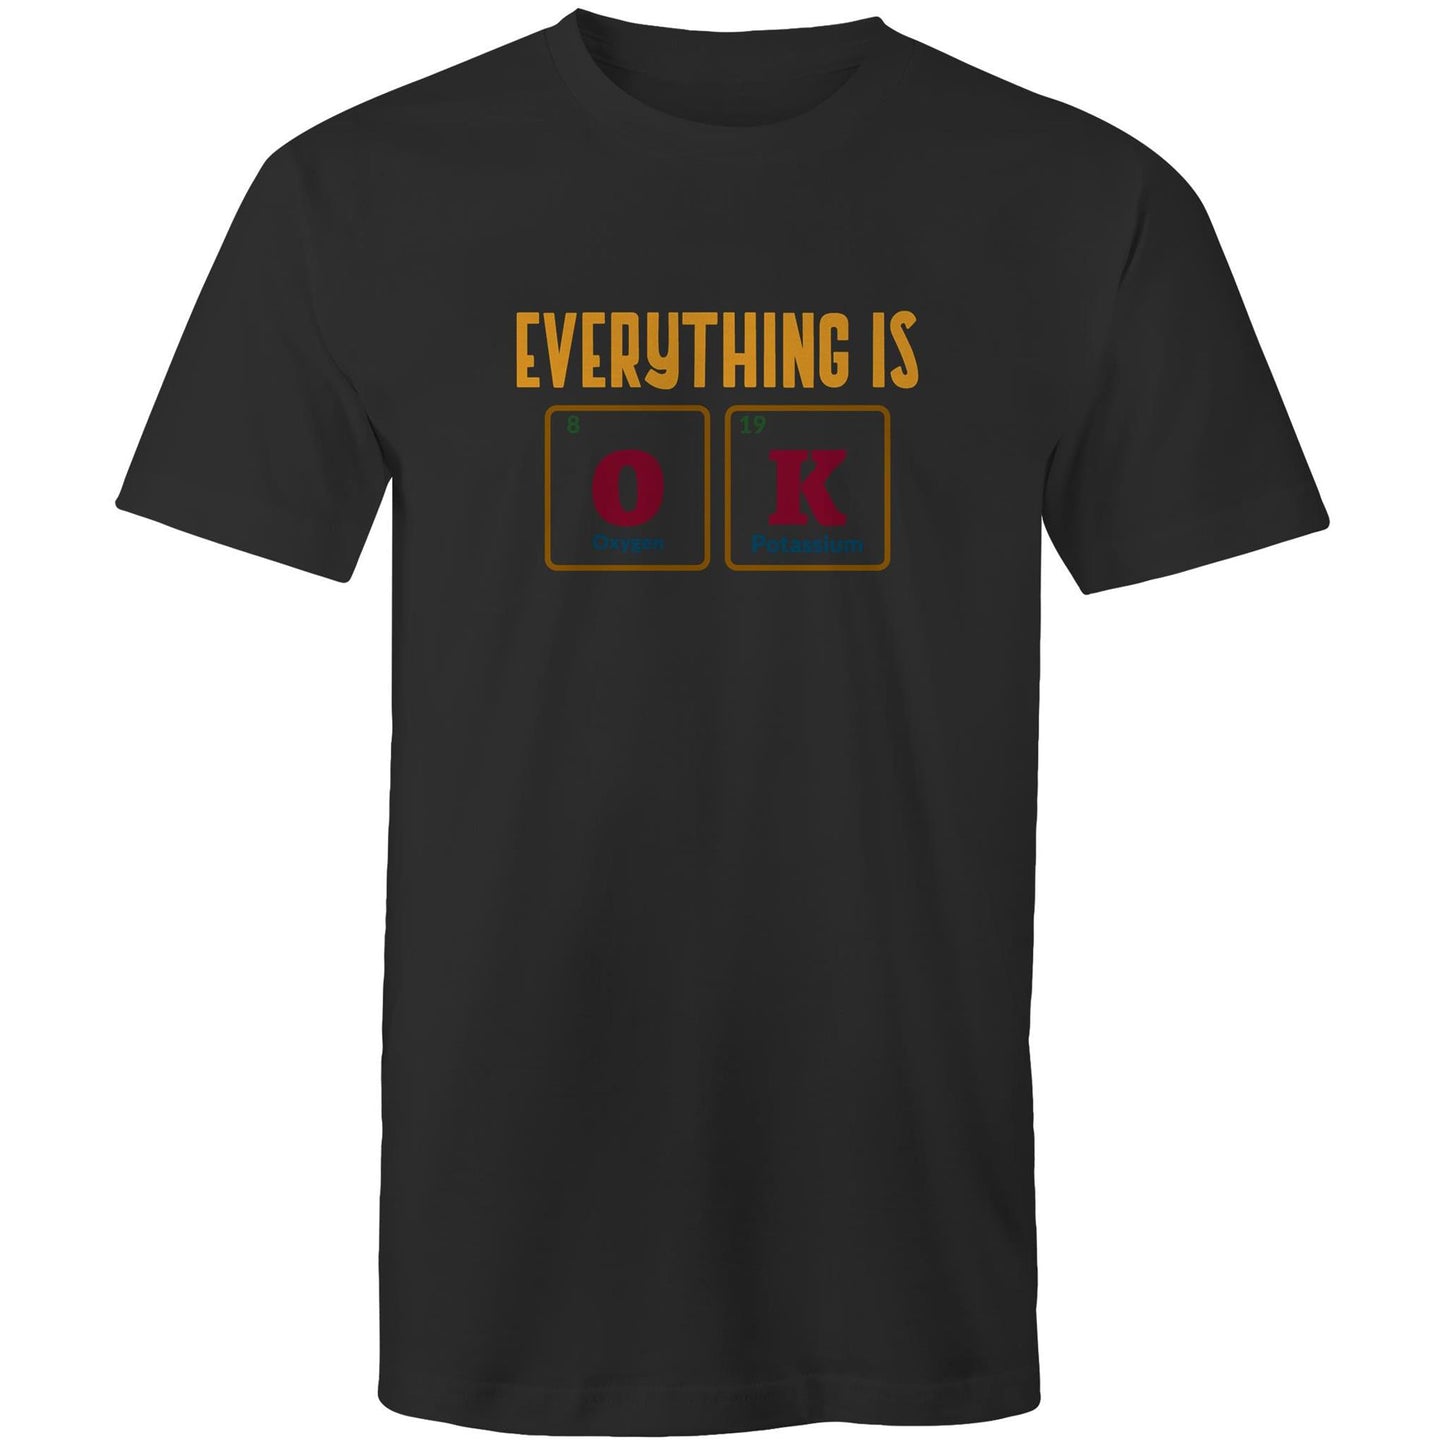 Everything Is OK, Periodic Table Of Elements - Mens T-Shirt Black Mens T-shirt Science